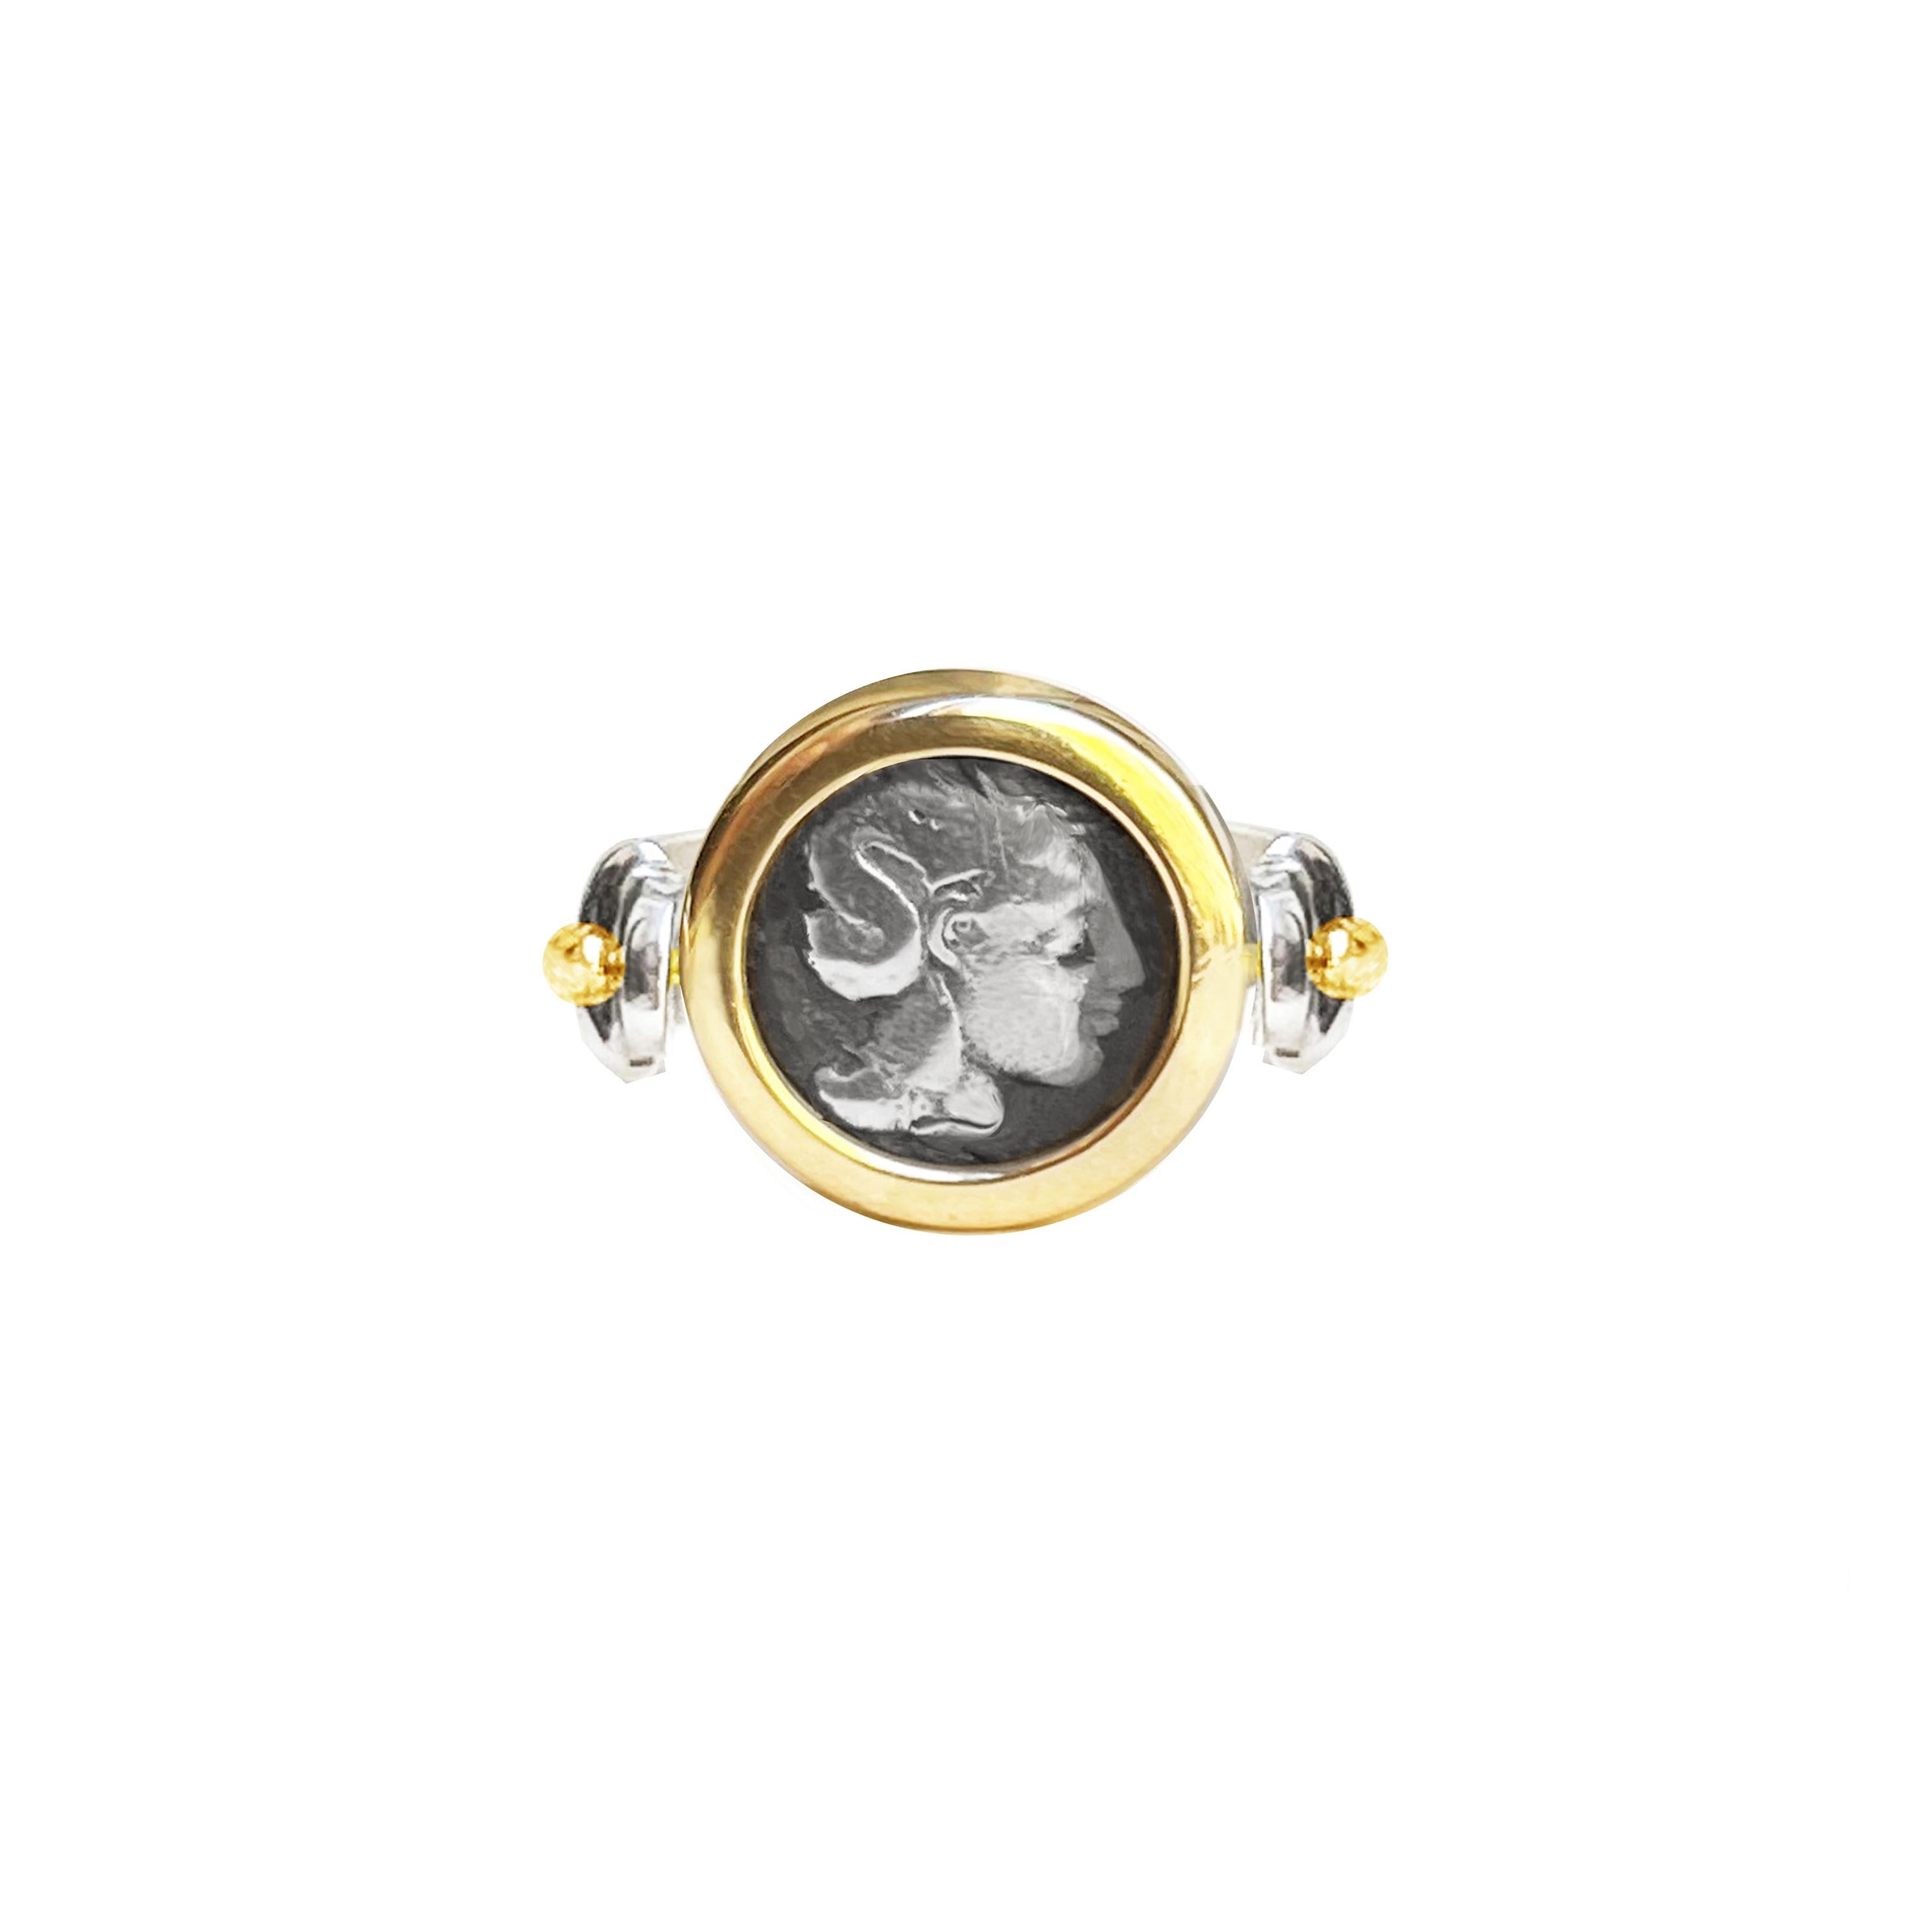 An authentic Greek diobolus dating back to 281 BC, depicting Goddess Athena, has been set in this 18 Kt gold and sterling silver ring; Heracles standing with a lion in the other side of the coin.
Athena is the Olympian goddess of wisdom and war and